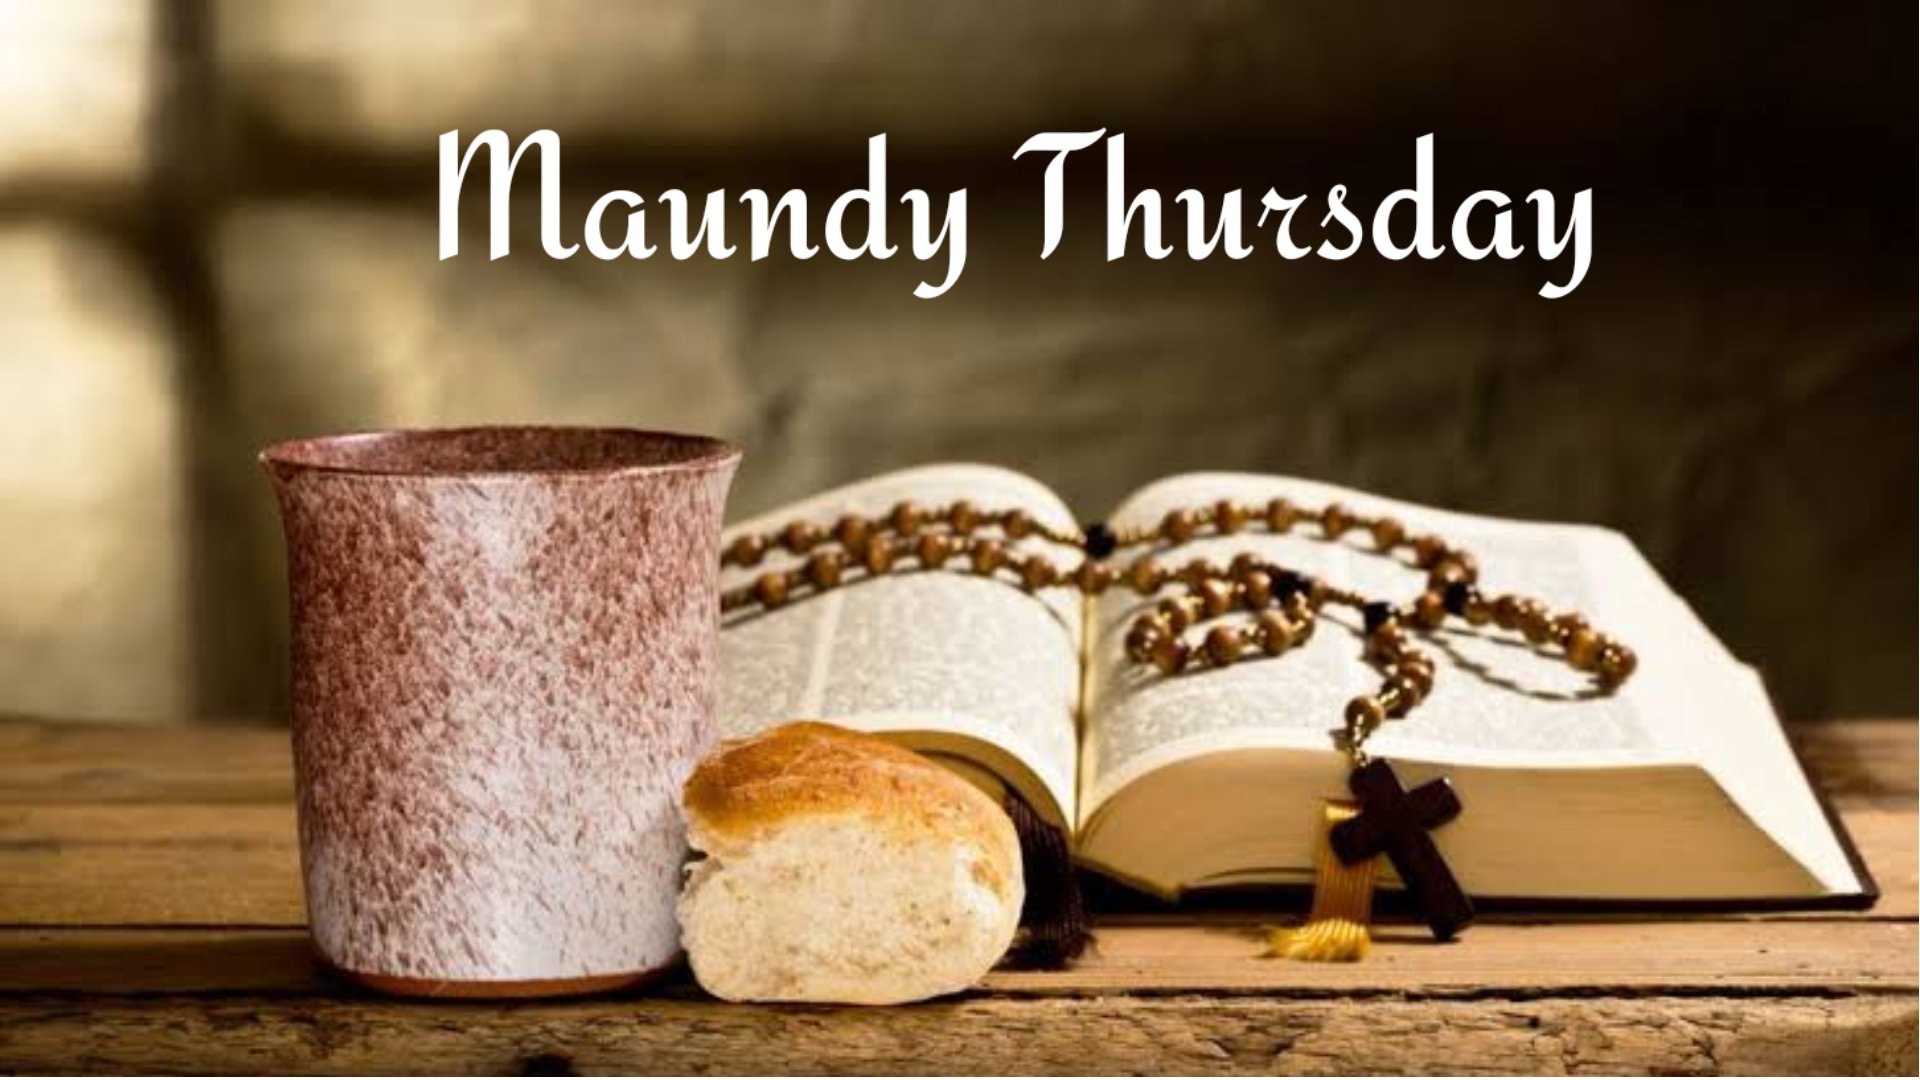 Best 32+ Happy Maundy Thursday Quotes and Wishes 2023